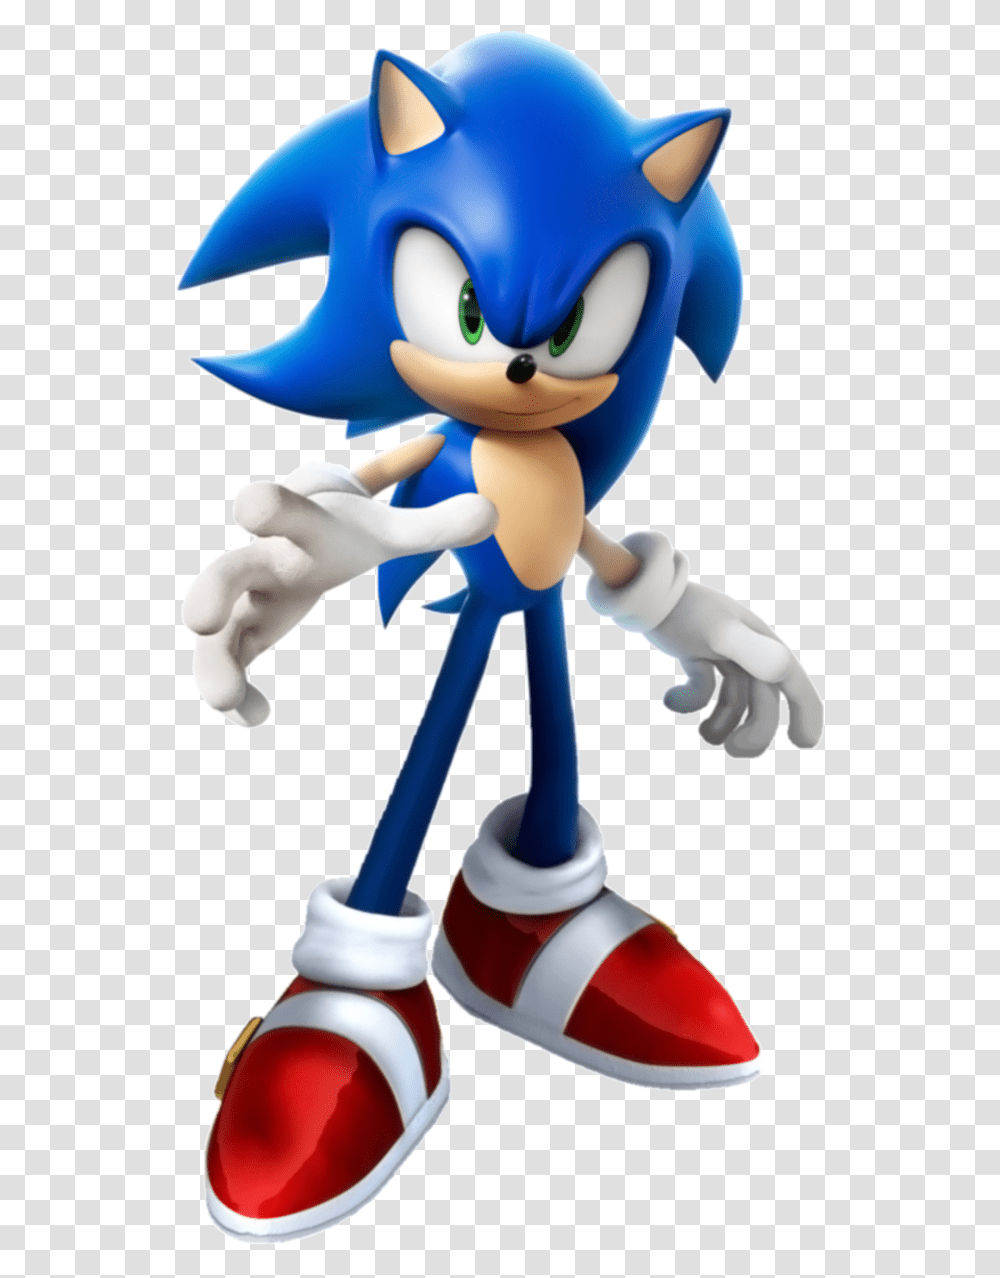 Sonic The Hedgehog Pic Sonic Wreck It Ralph Poster, Toy, Figurine, Super Mario Transparent Png